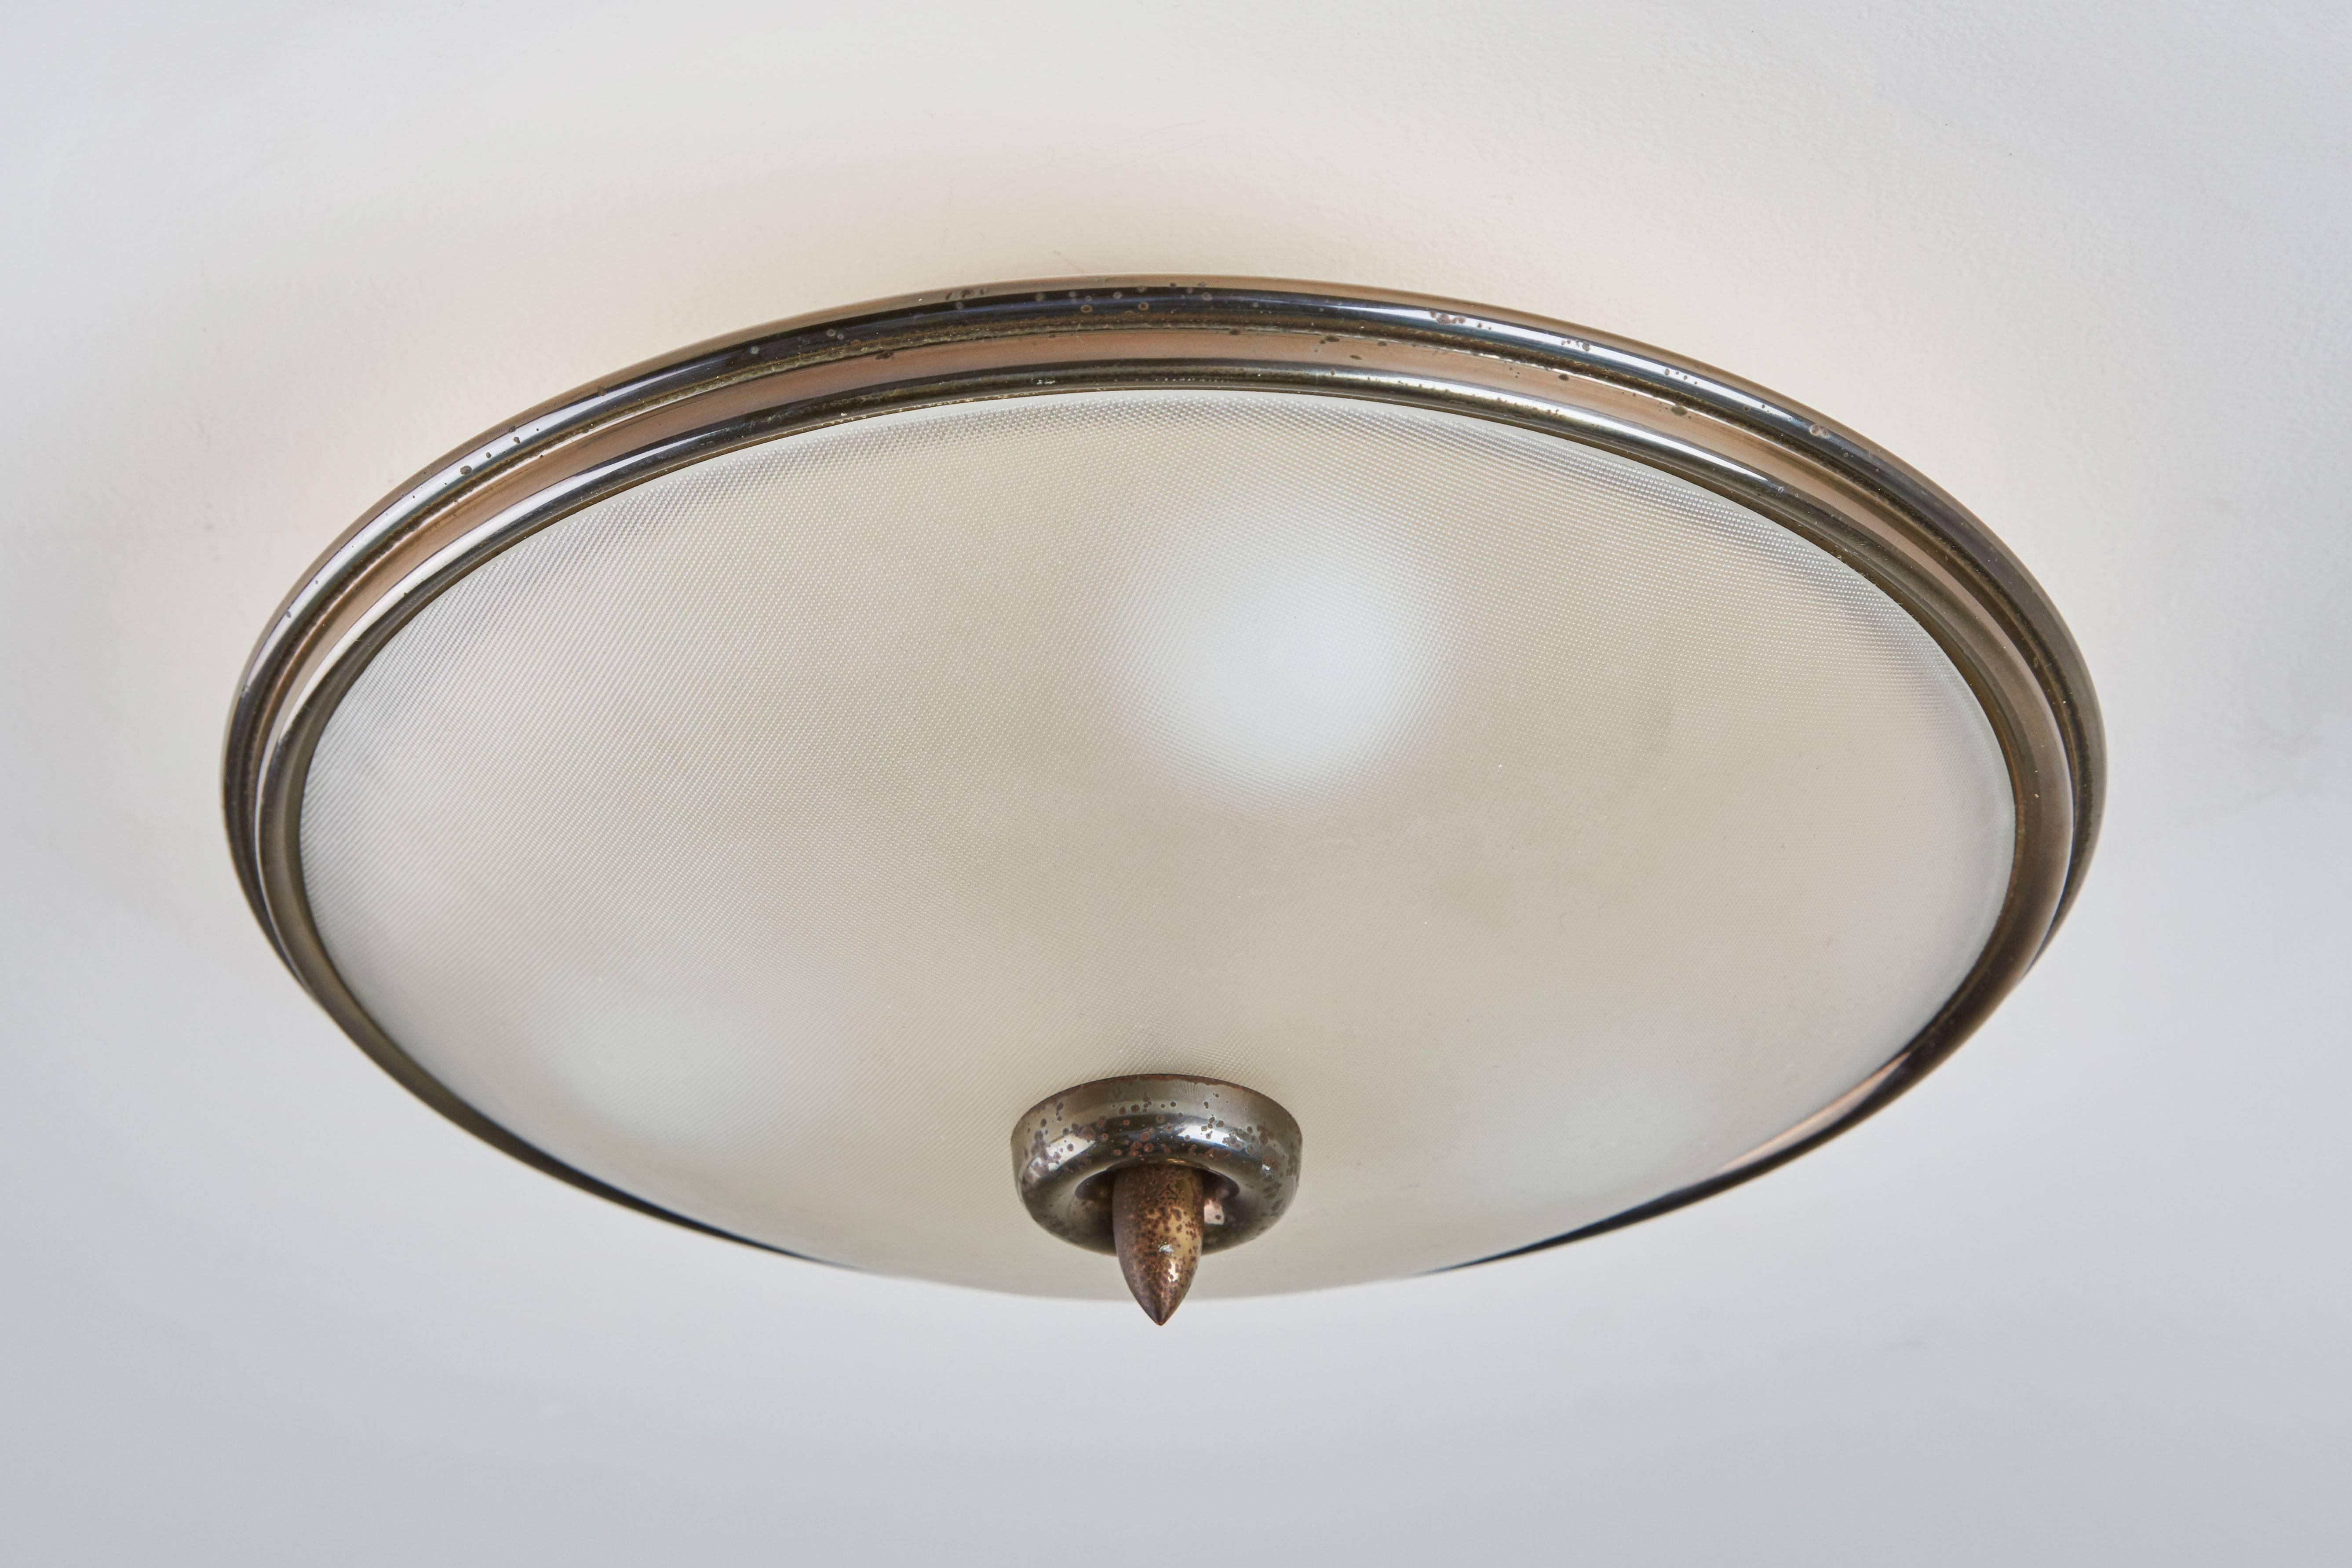 Pair of brass and textured glass Italian flush mount ceiling lights designed in Italy, circa 1950s. Rewired for US junction boxes. Takes three E27 75w maximum bulbs per light.

Pair of larger size available.